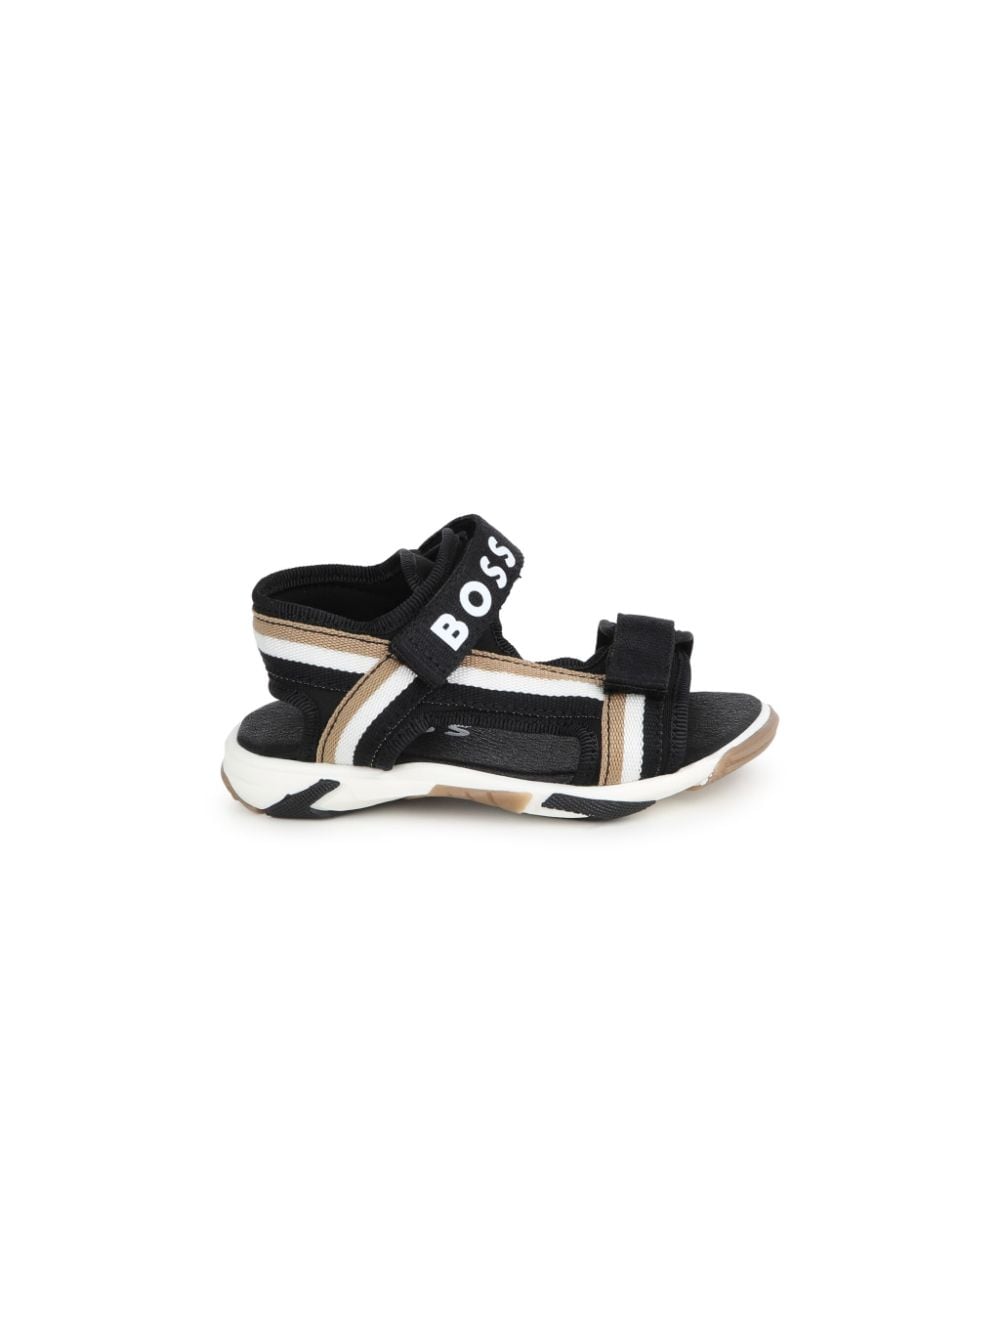 Black sandals for boys with logo